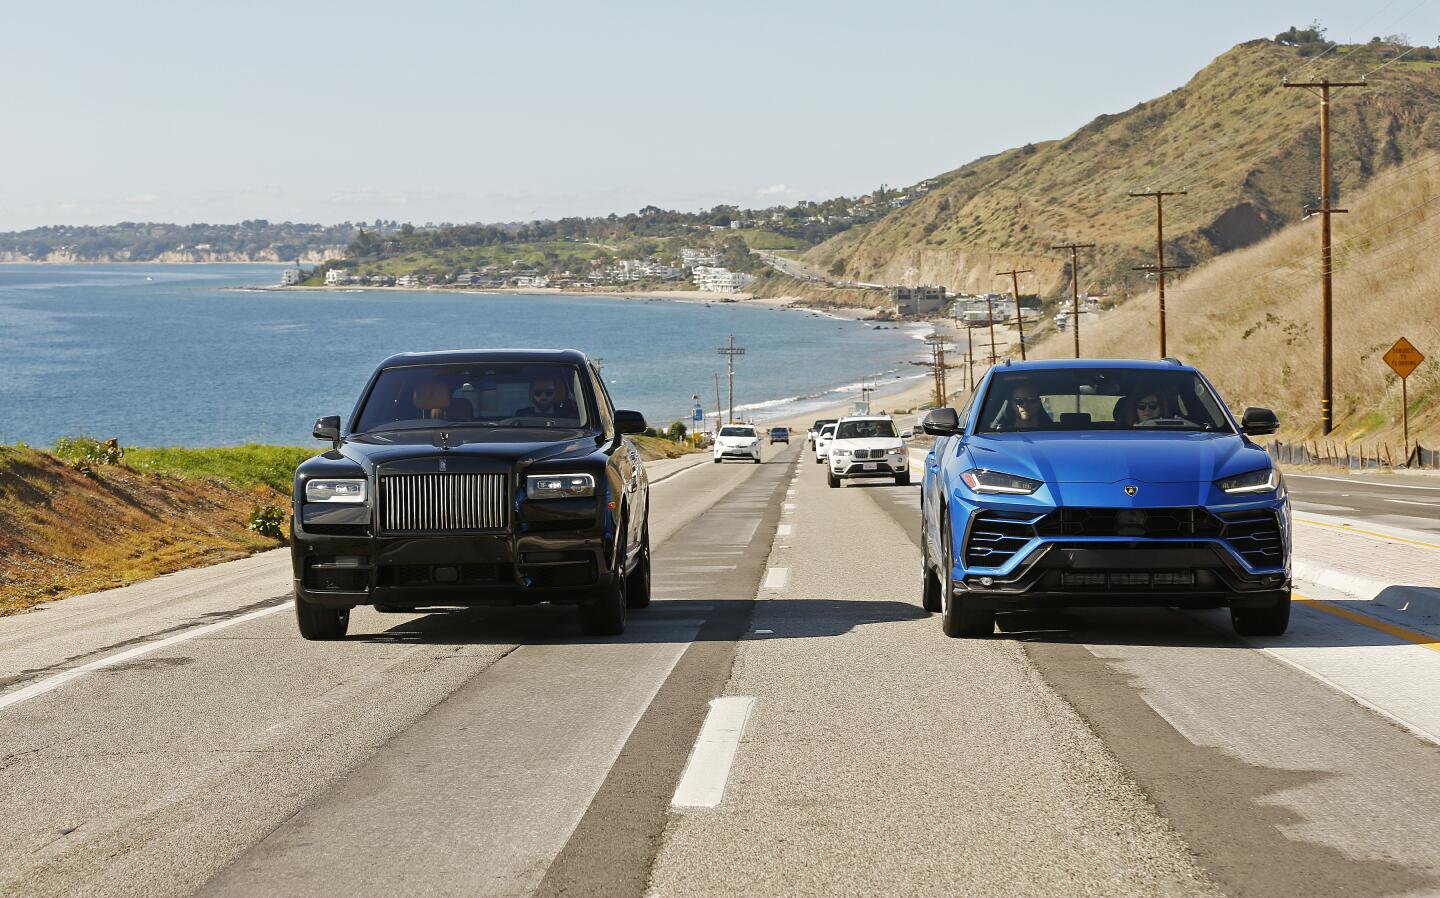 The Lamborghini Urus, in blue, and the Rolls-Royce Cullinan, in black, side by side on a Malibu road.